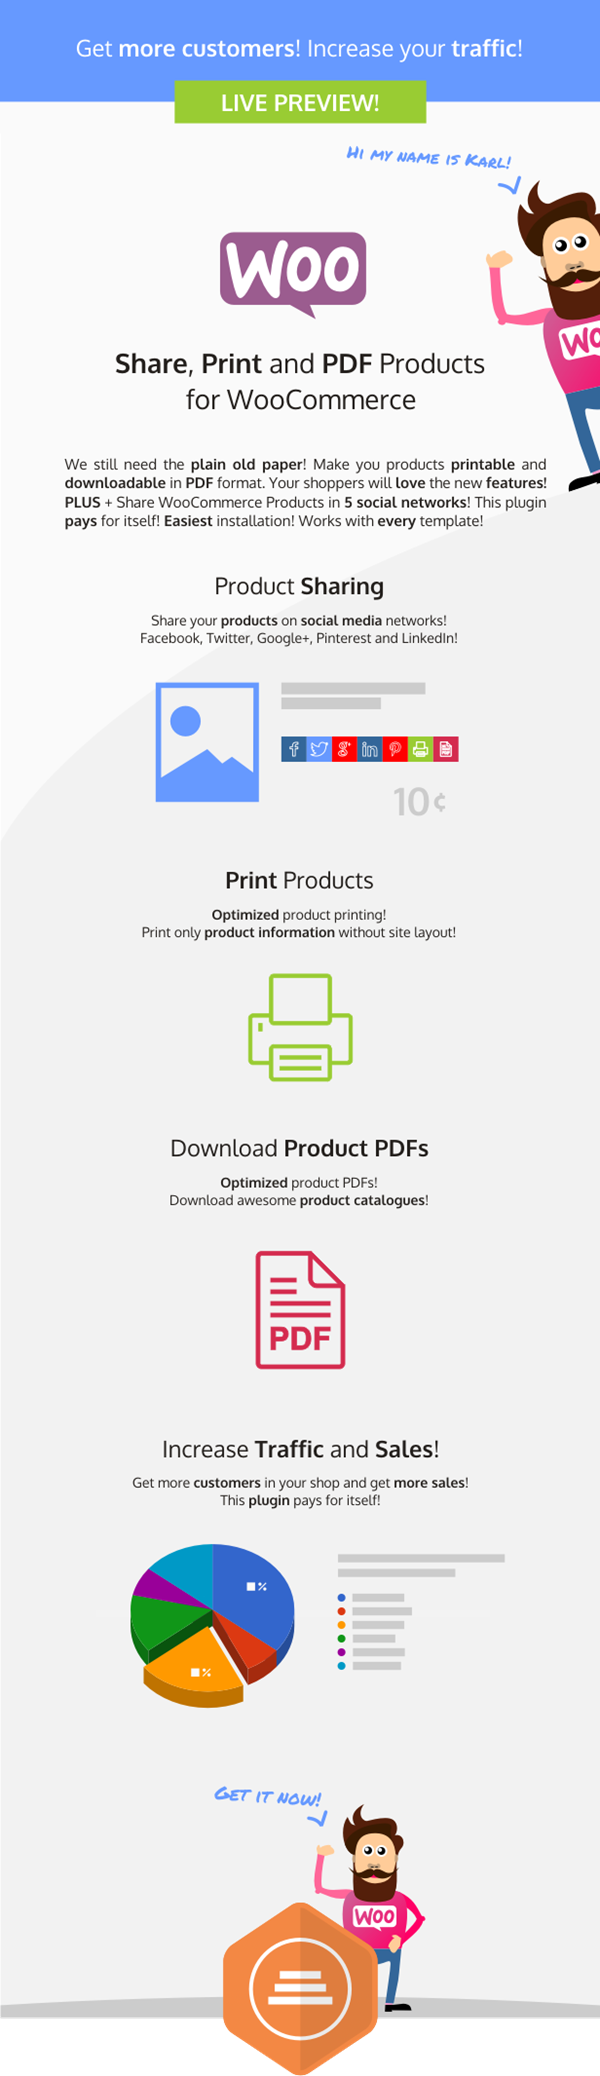 Share, Print and PDF Products for WooCommerce - 3